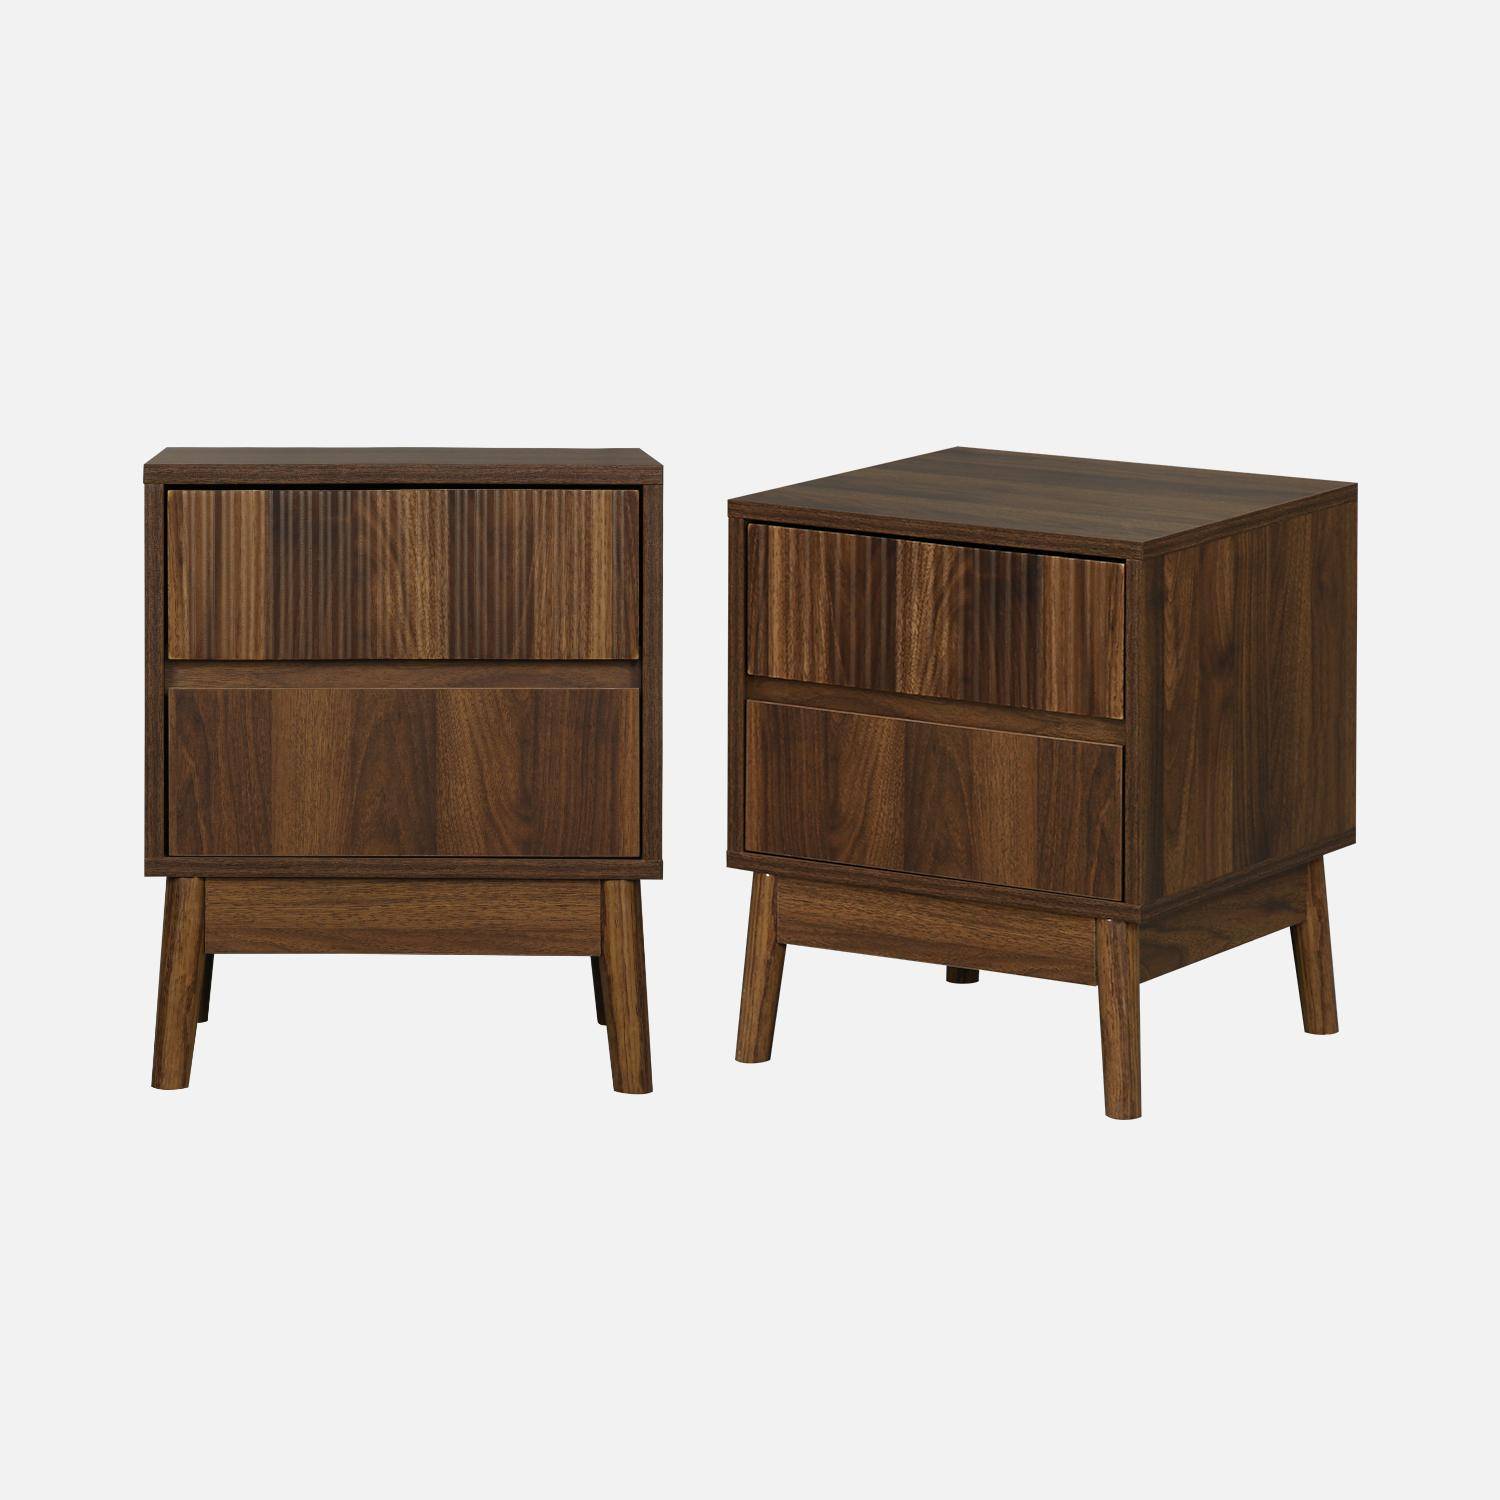 Pair of grooved wooden bedside tables with 2 drawers, 40x39x48cm - Linear - Dark Wood colour Photo4